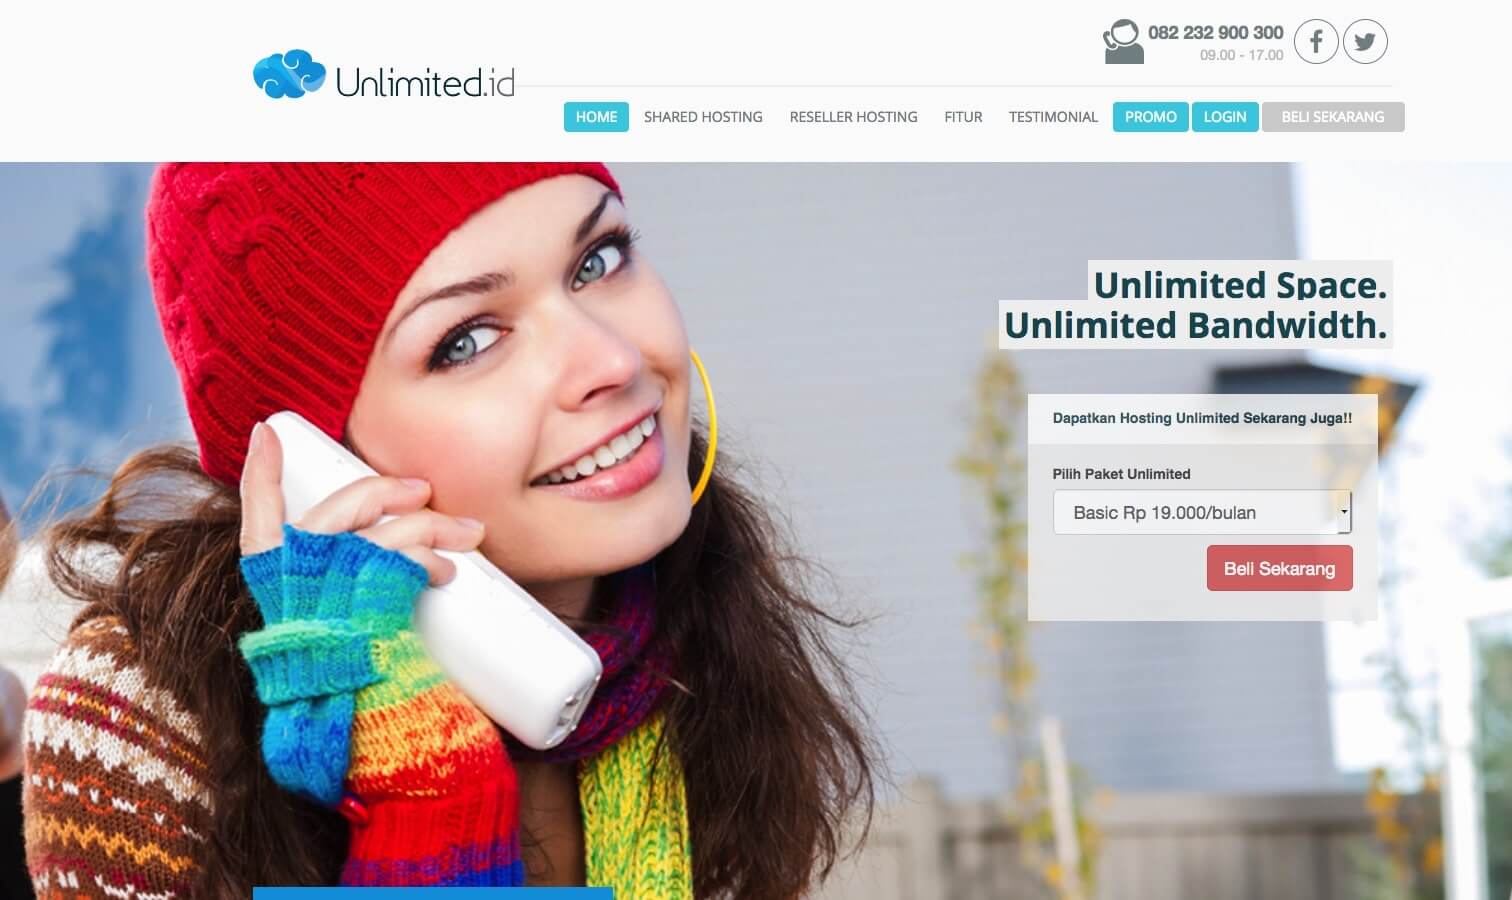 Review Unlimited.Id - Pengamat Hosting